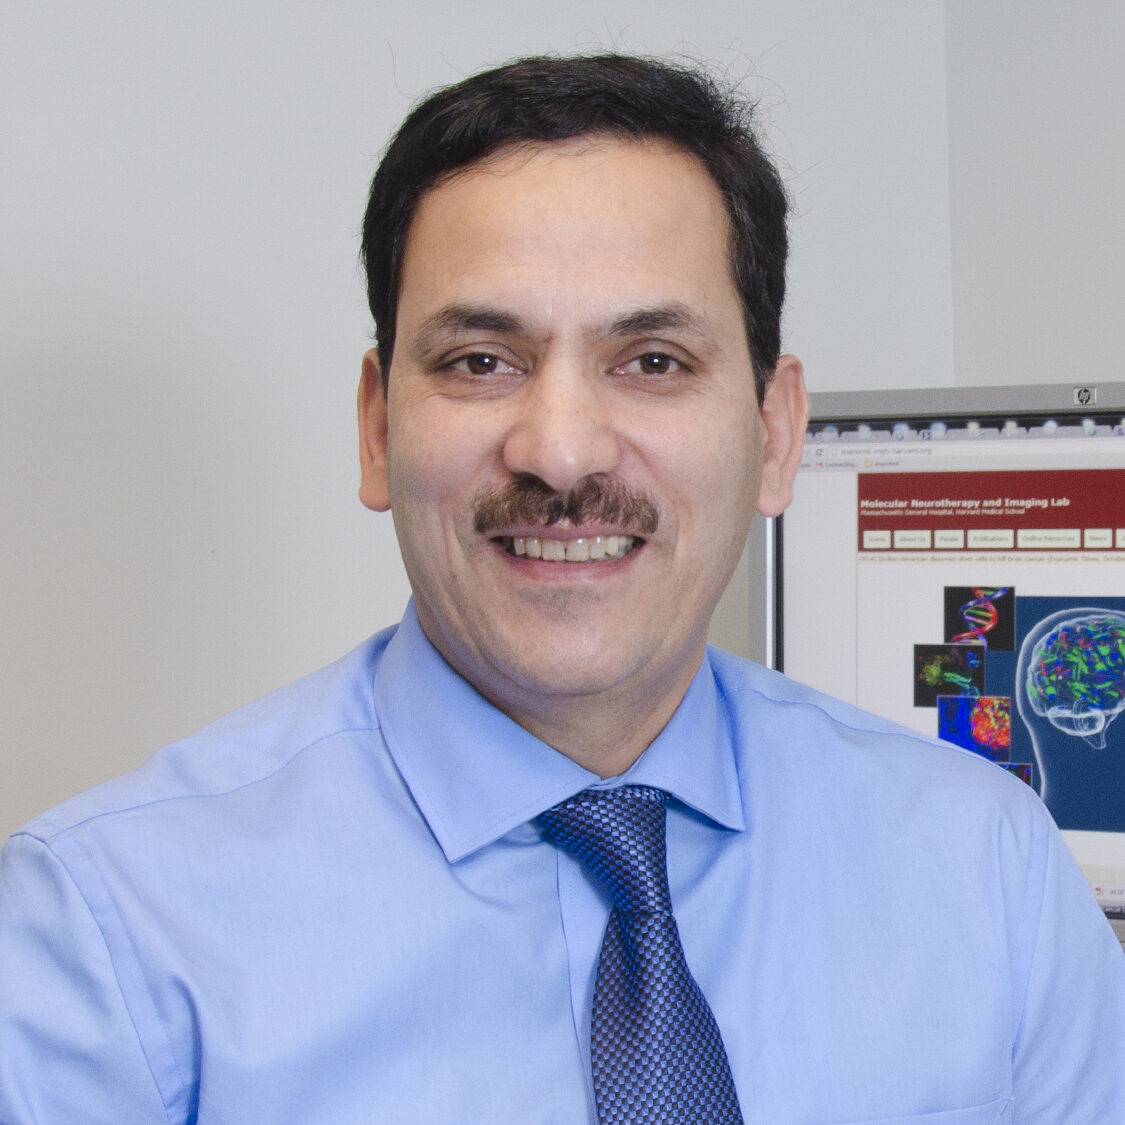 Shah_Khalid_2015_EP, Khalid Shah, MS, PhD
Head, Molecular Neurotherapy and Imaging Laboratory
Director, Stem Cell Therapeutics and Imaging Program
Department of Radiology and Neurology
Massachusetts General Hospital
Principal Faculty, Harvard Stem Cell Institute,